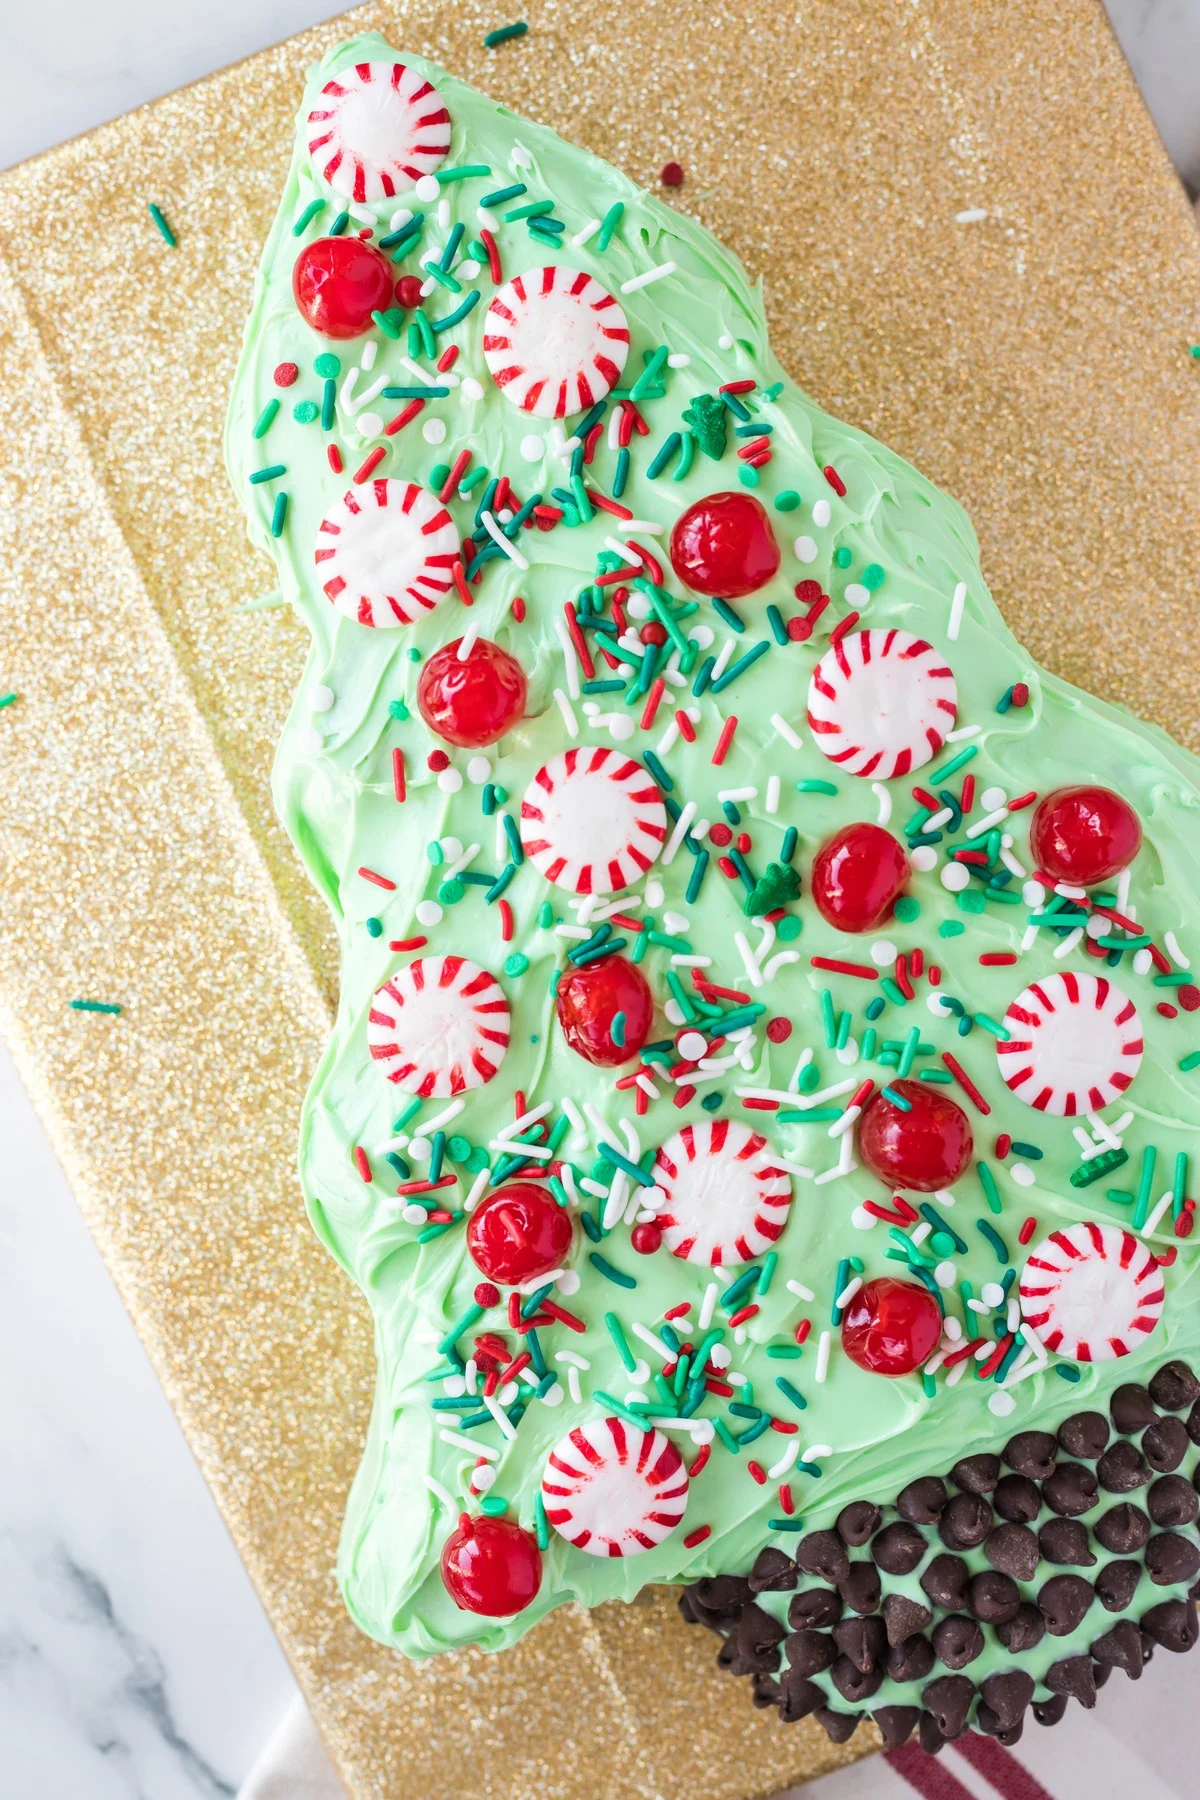 https://www.southerncravings.com/wp-content/uploads/2022/10/Christmas-Tree-Cake-21.jpg.webp